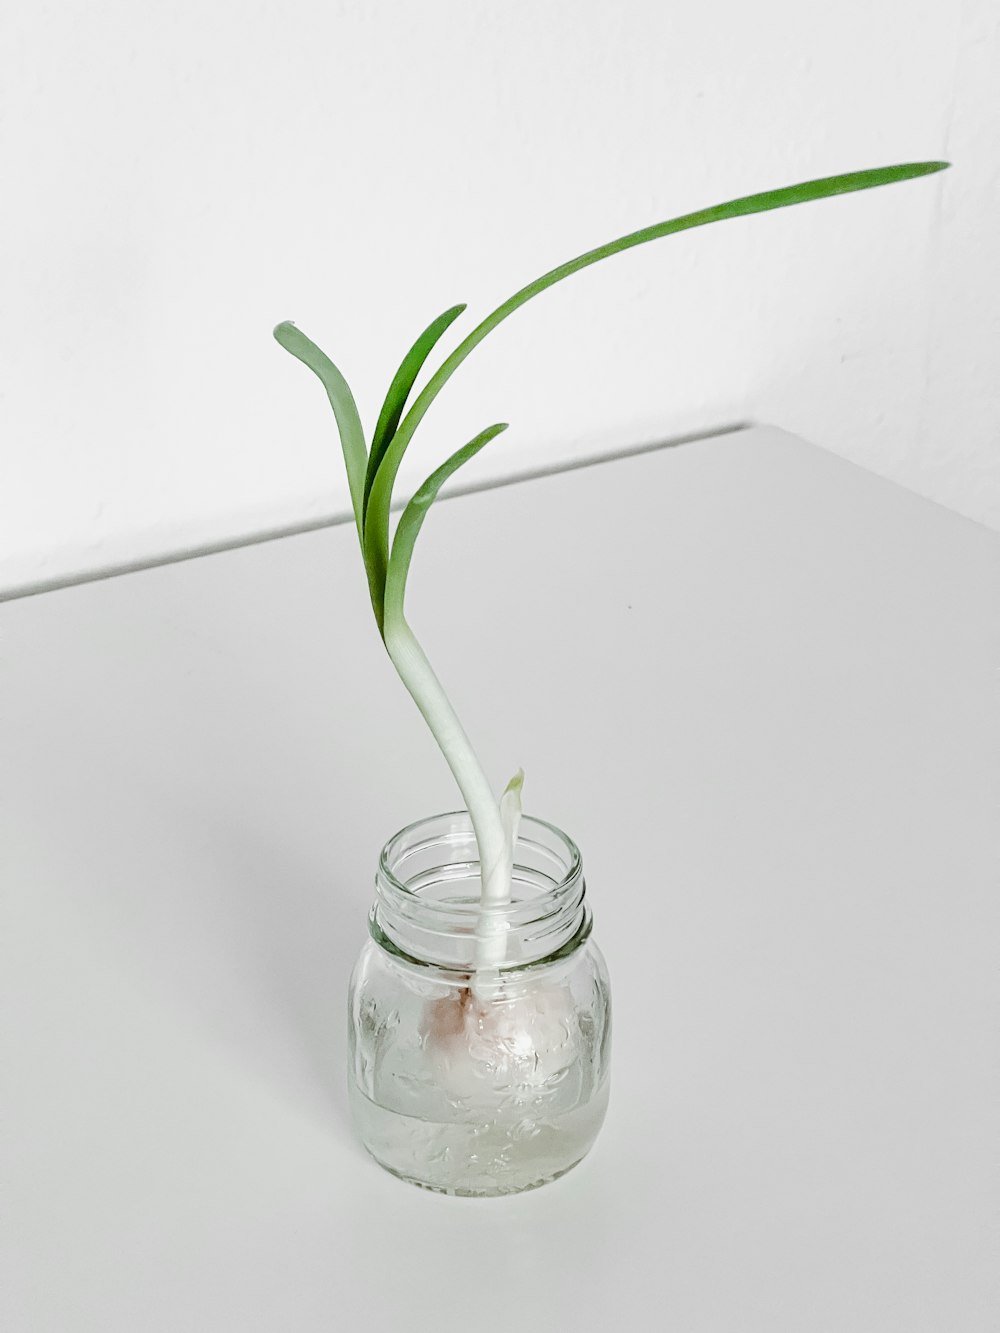 a plant is growing out of a glass jar